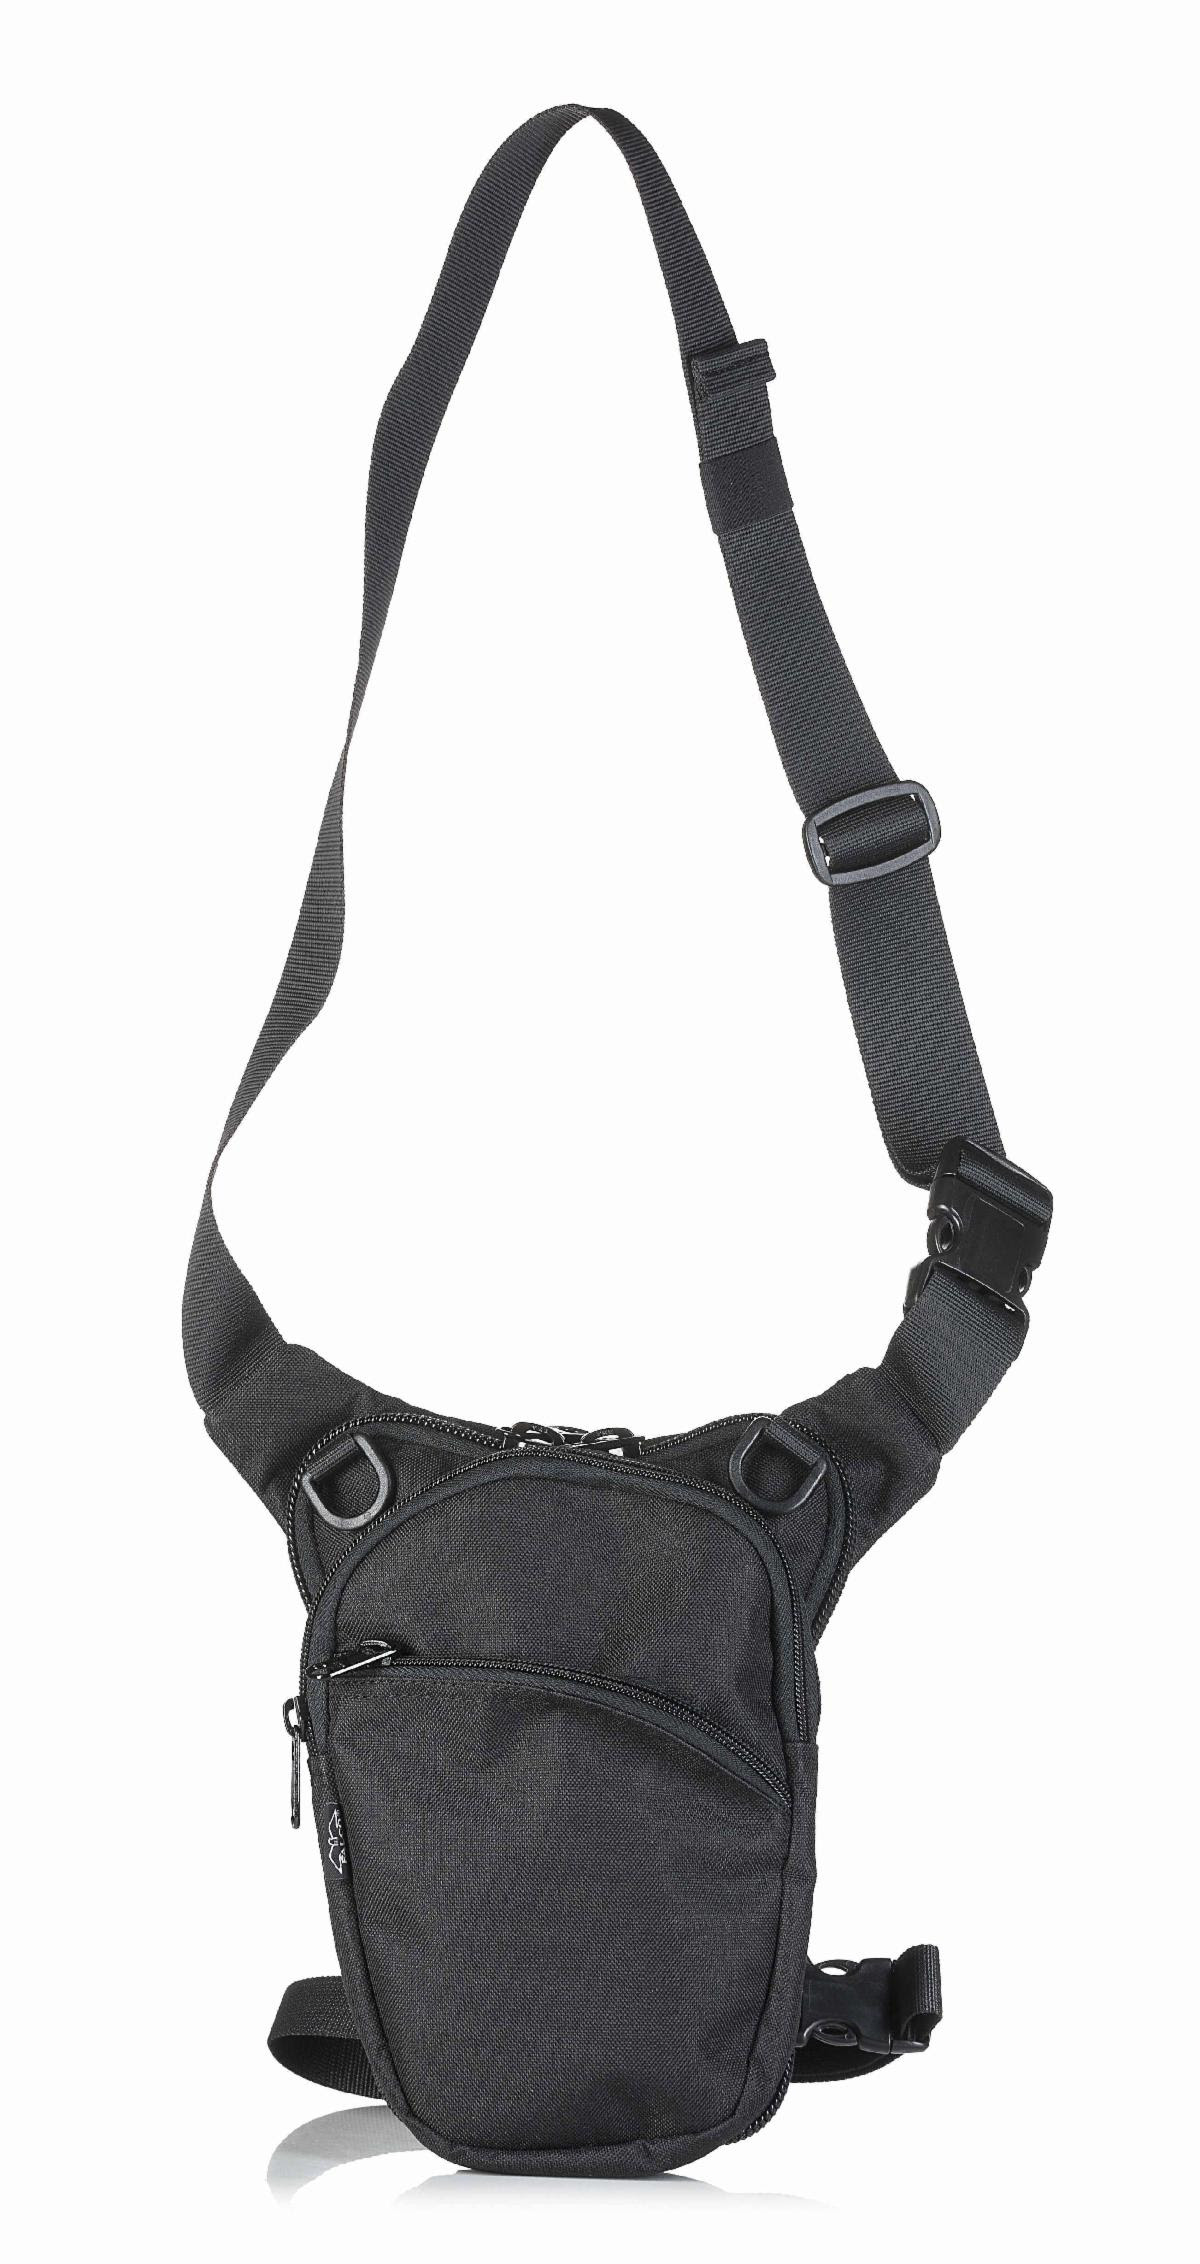 FALCO Holsters Simple Concealed Carry Handgun Bag, Thigh Carry Bag